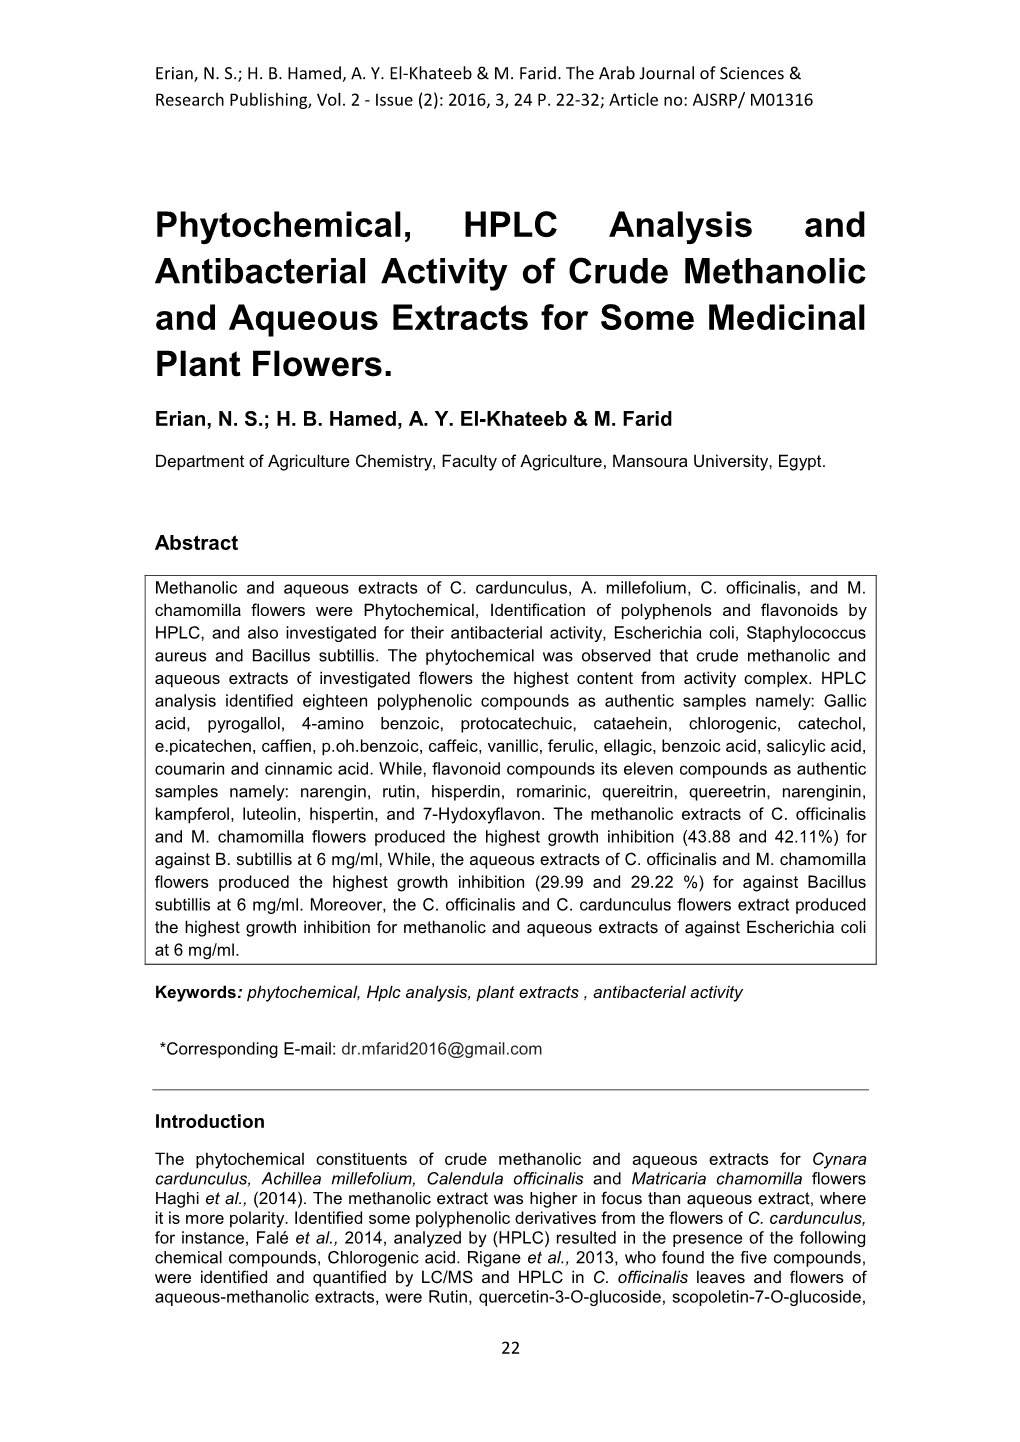 Phytochemical, HPLC Analysis and Antibacterial Activity of Crude Methanolic and Aqueous Extracts for Some Medicinal Plant Flowers